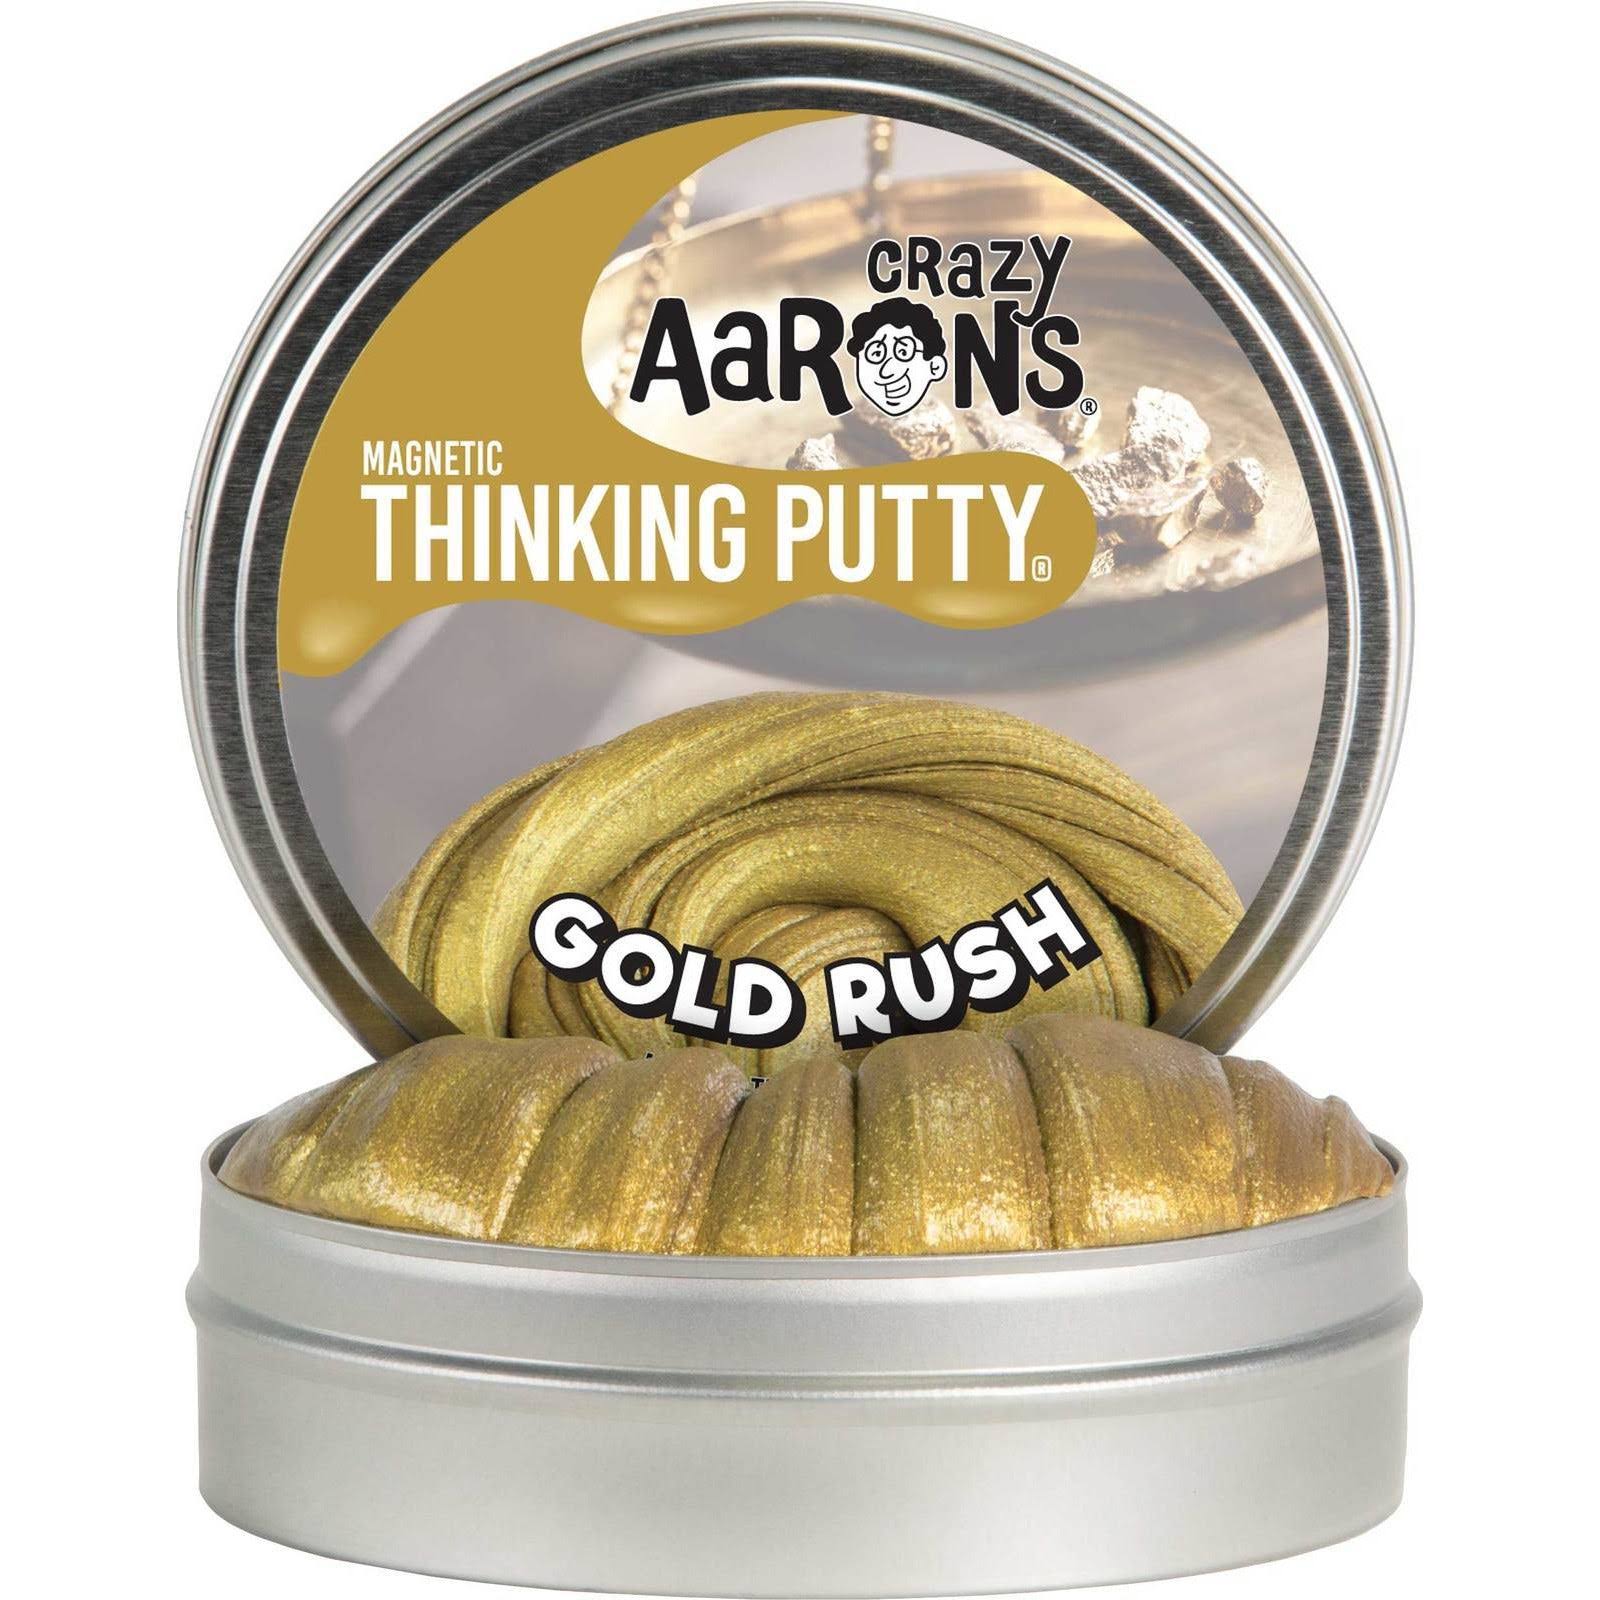 Crazy Aarons Magnetic Thinking Putty Gold Rush 4" Tin